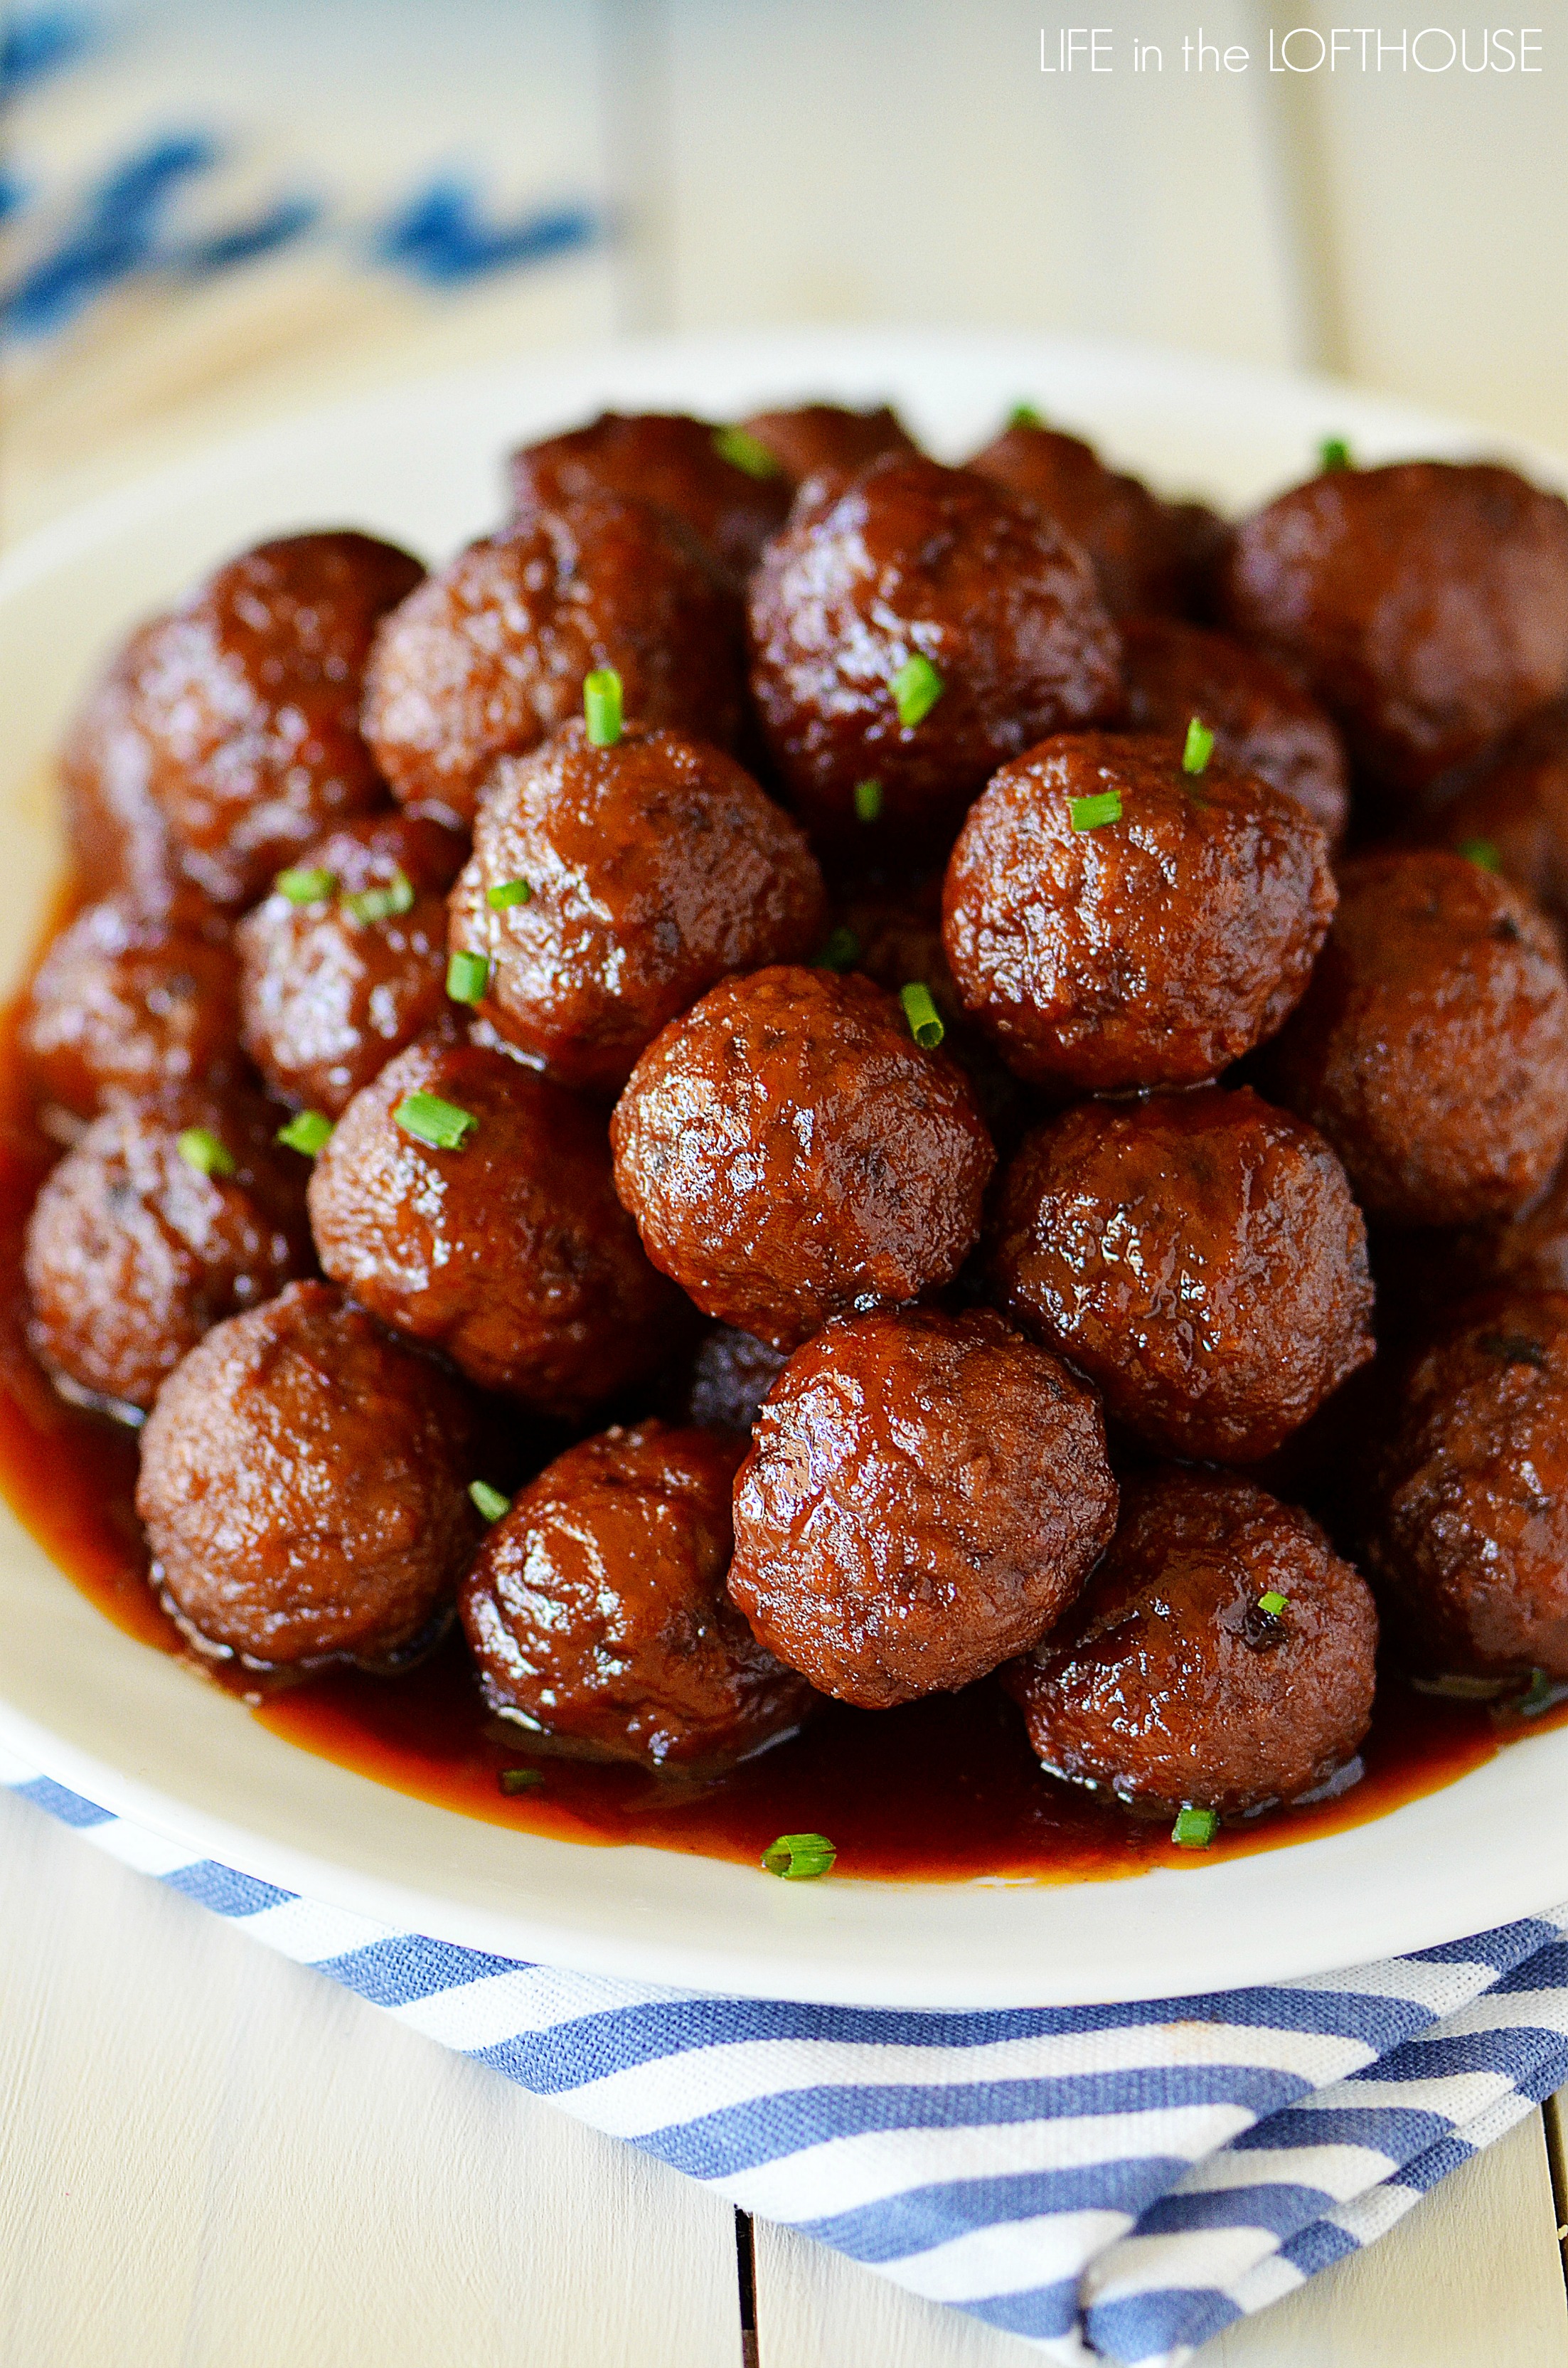 sweet and sour, meatballs, appetizers, yummy, holiday snacks, hosting, easy to make, method39, favorite things, food